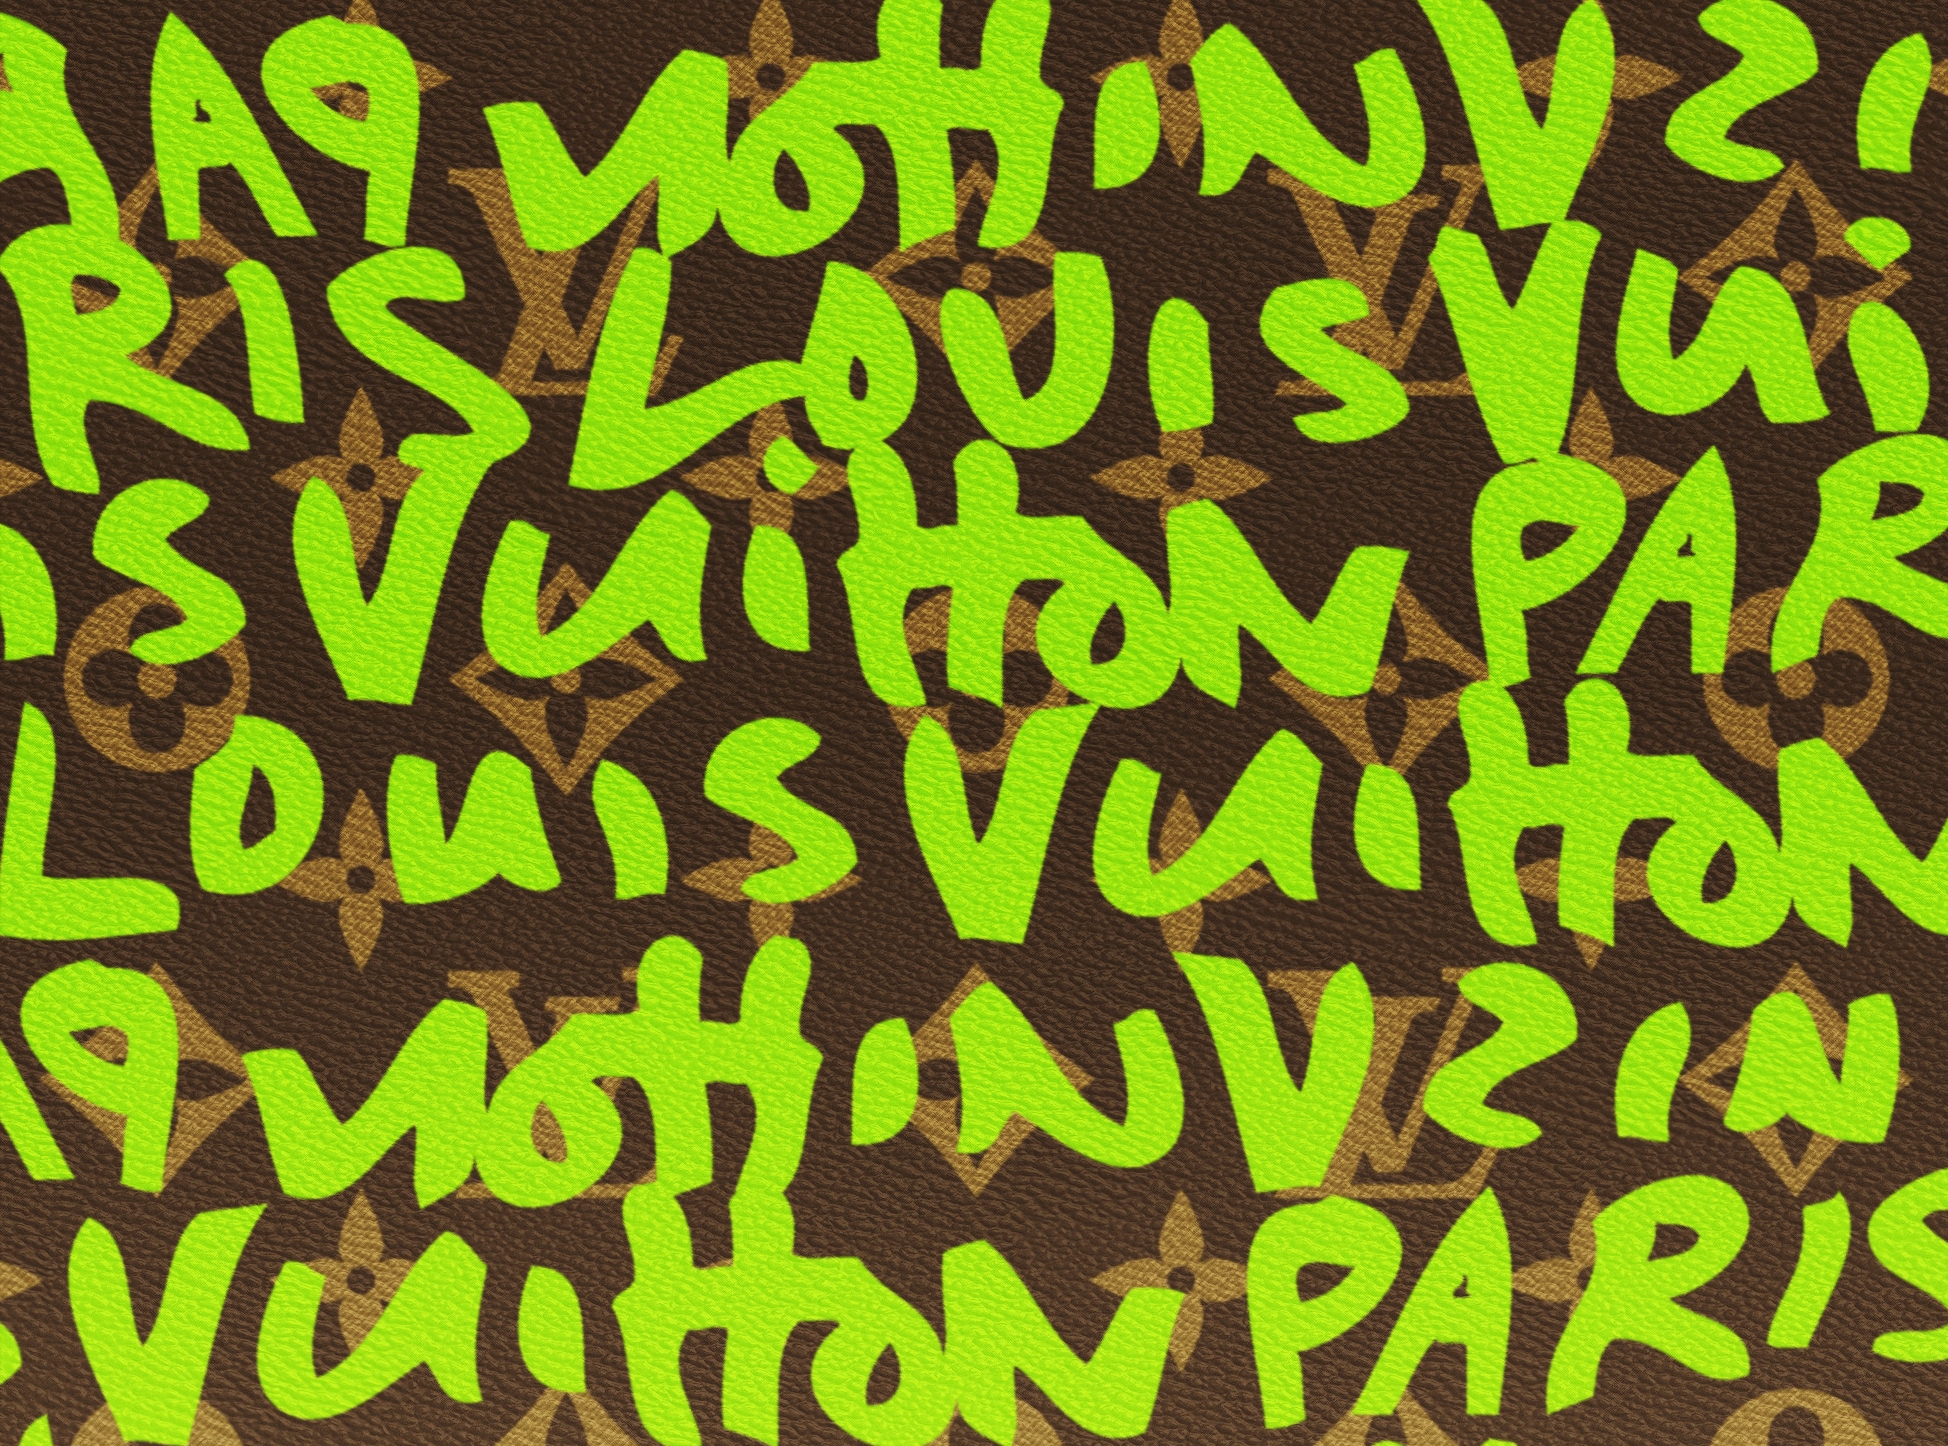 Does anyone know the Louis Vuitton Stephen Sprouse font or something  similar? : r/identifythisfont